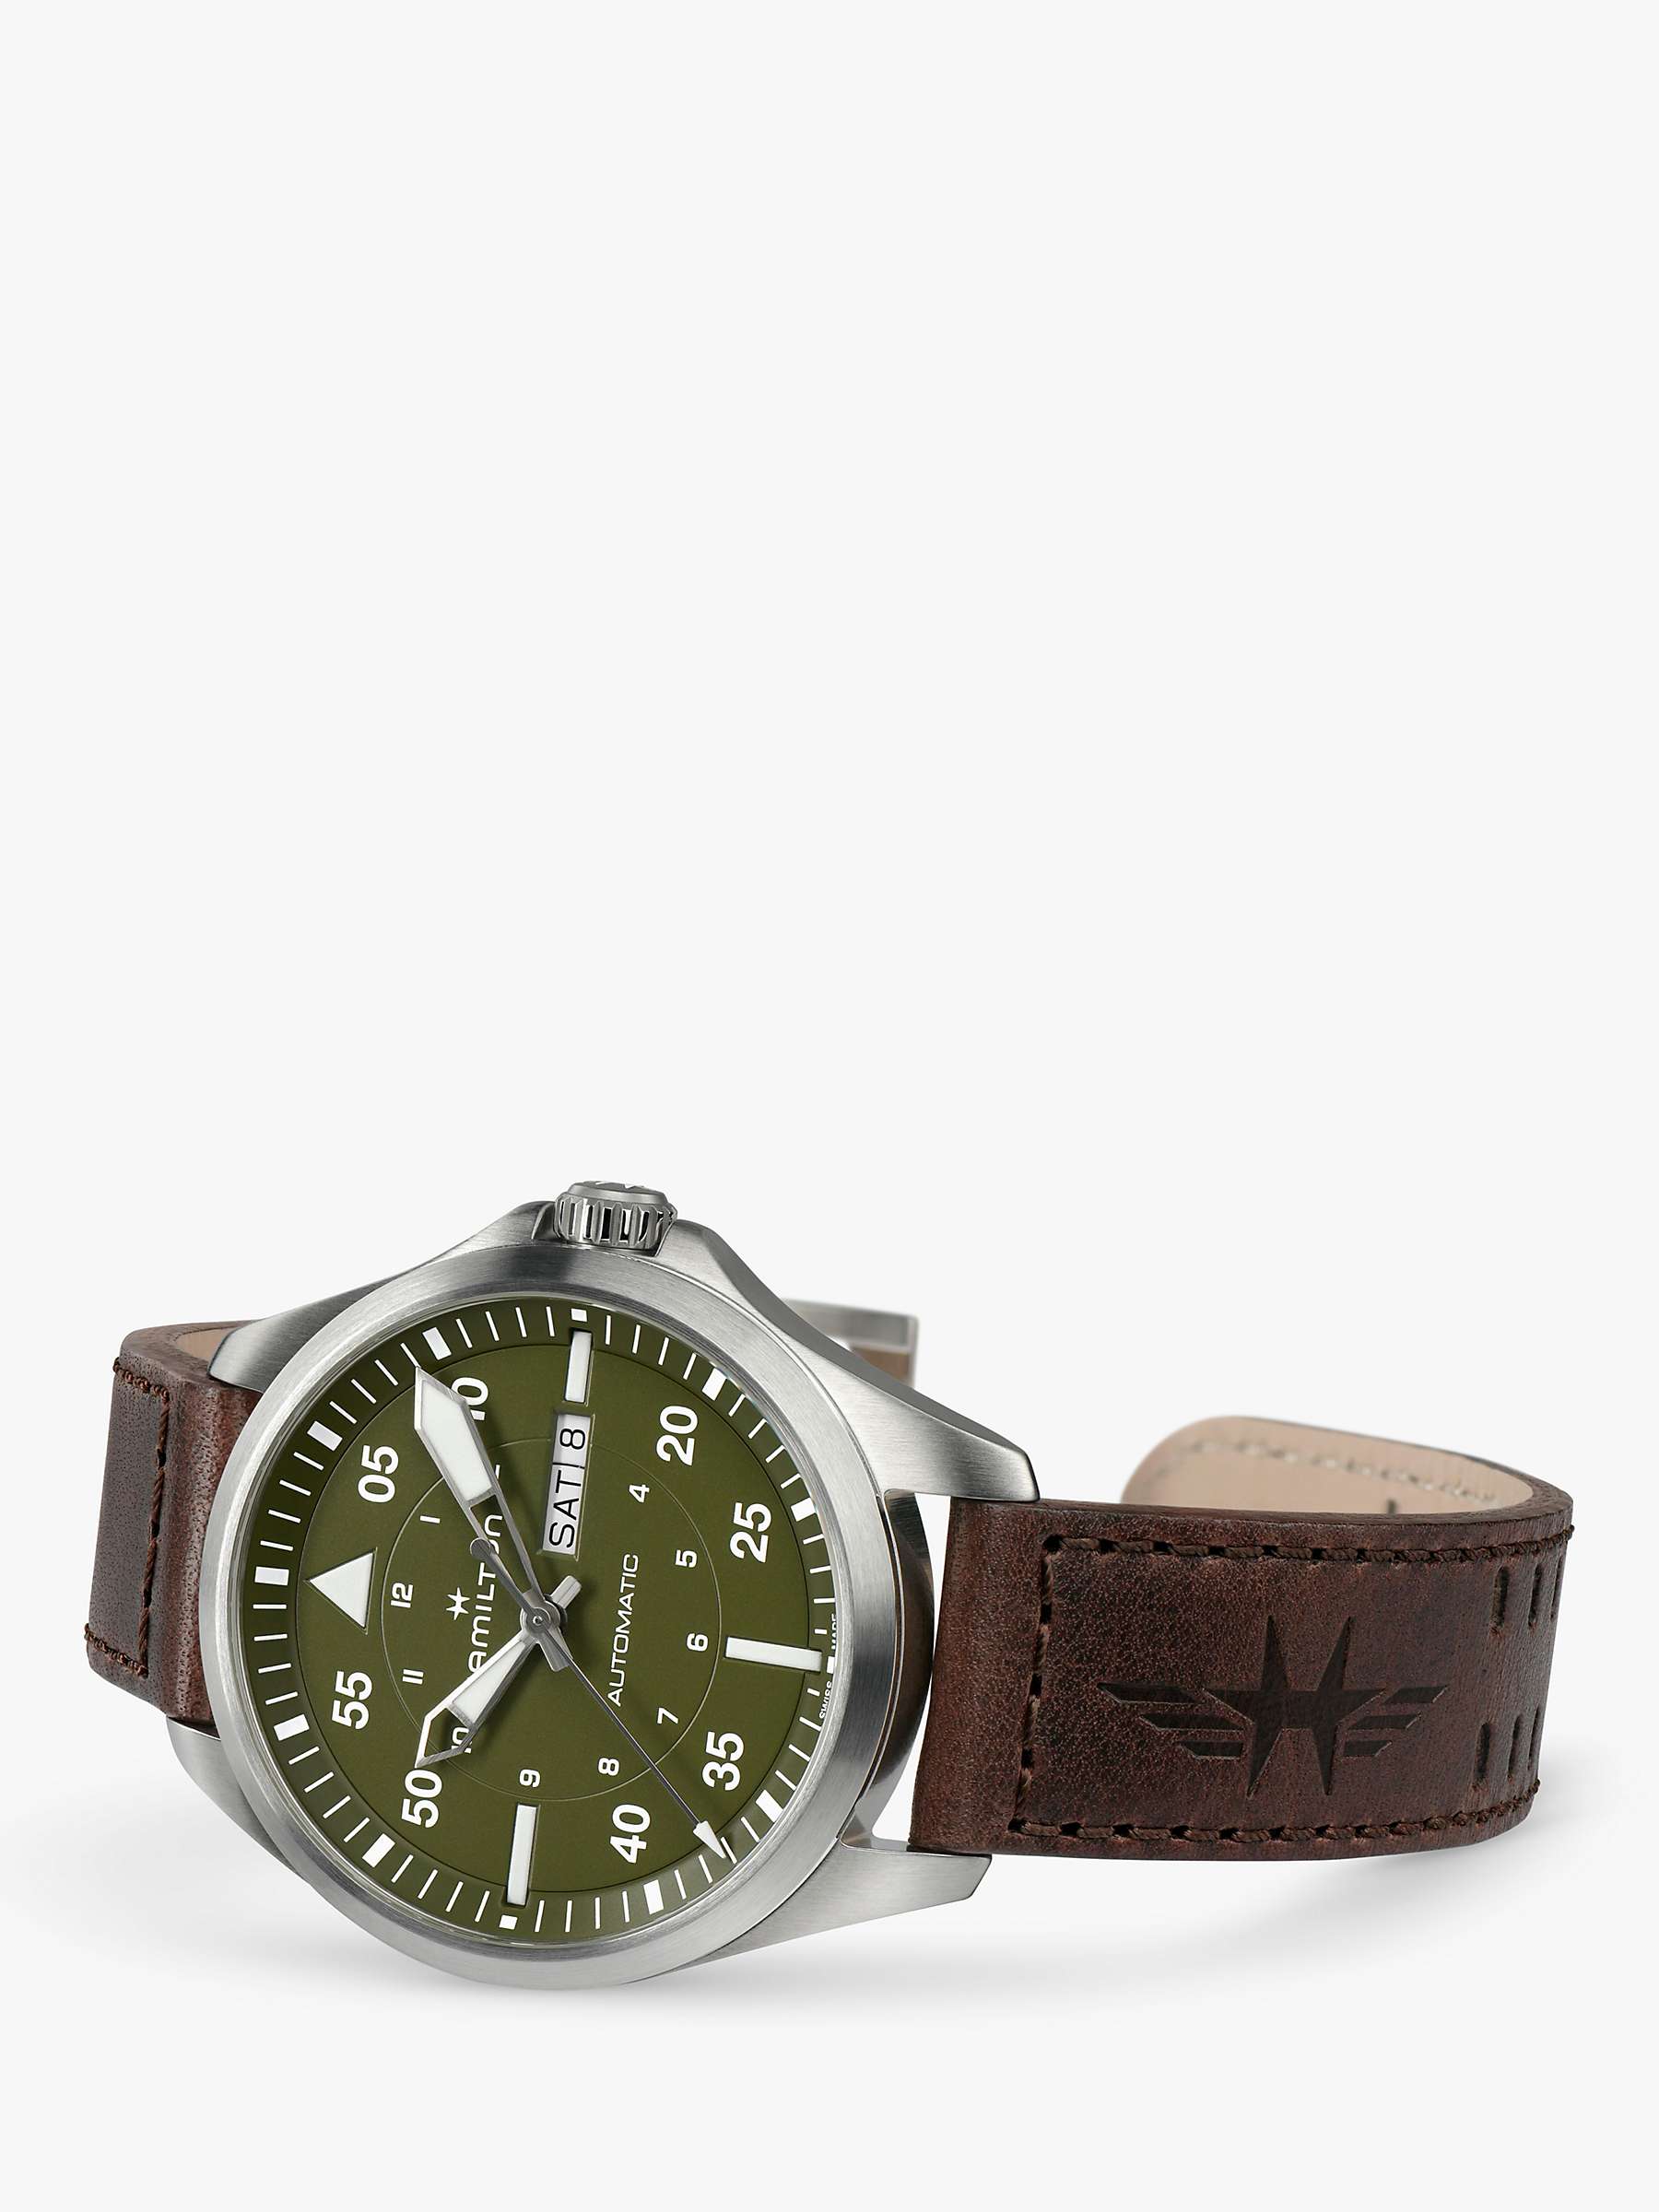 Buy Hamilton H64635560 Men's Khaki Aviation Pilot Day Date Automatic Leather Strap Watch, Green/Brown Online at johnlewis.com